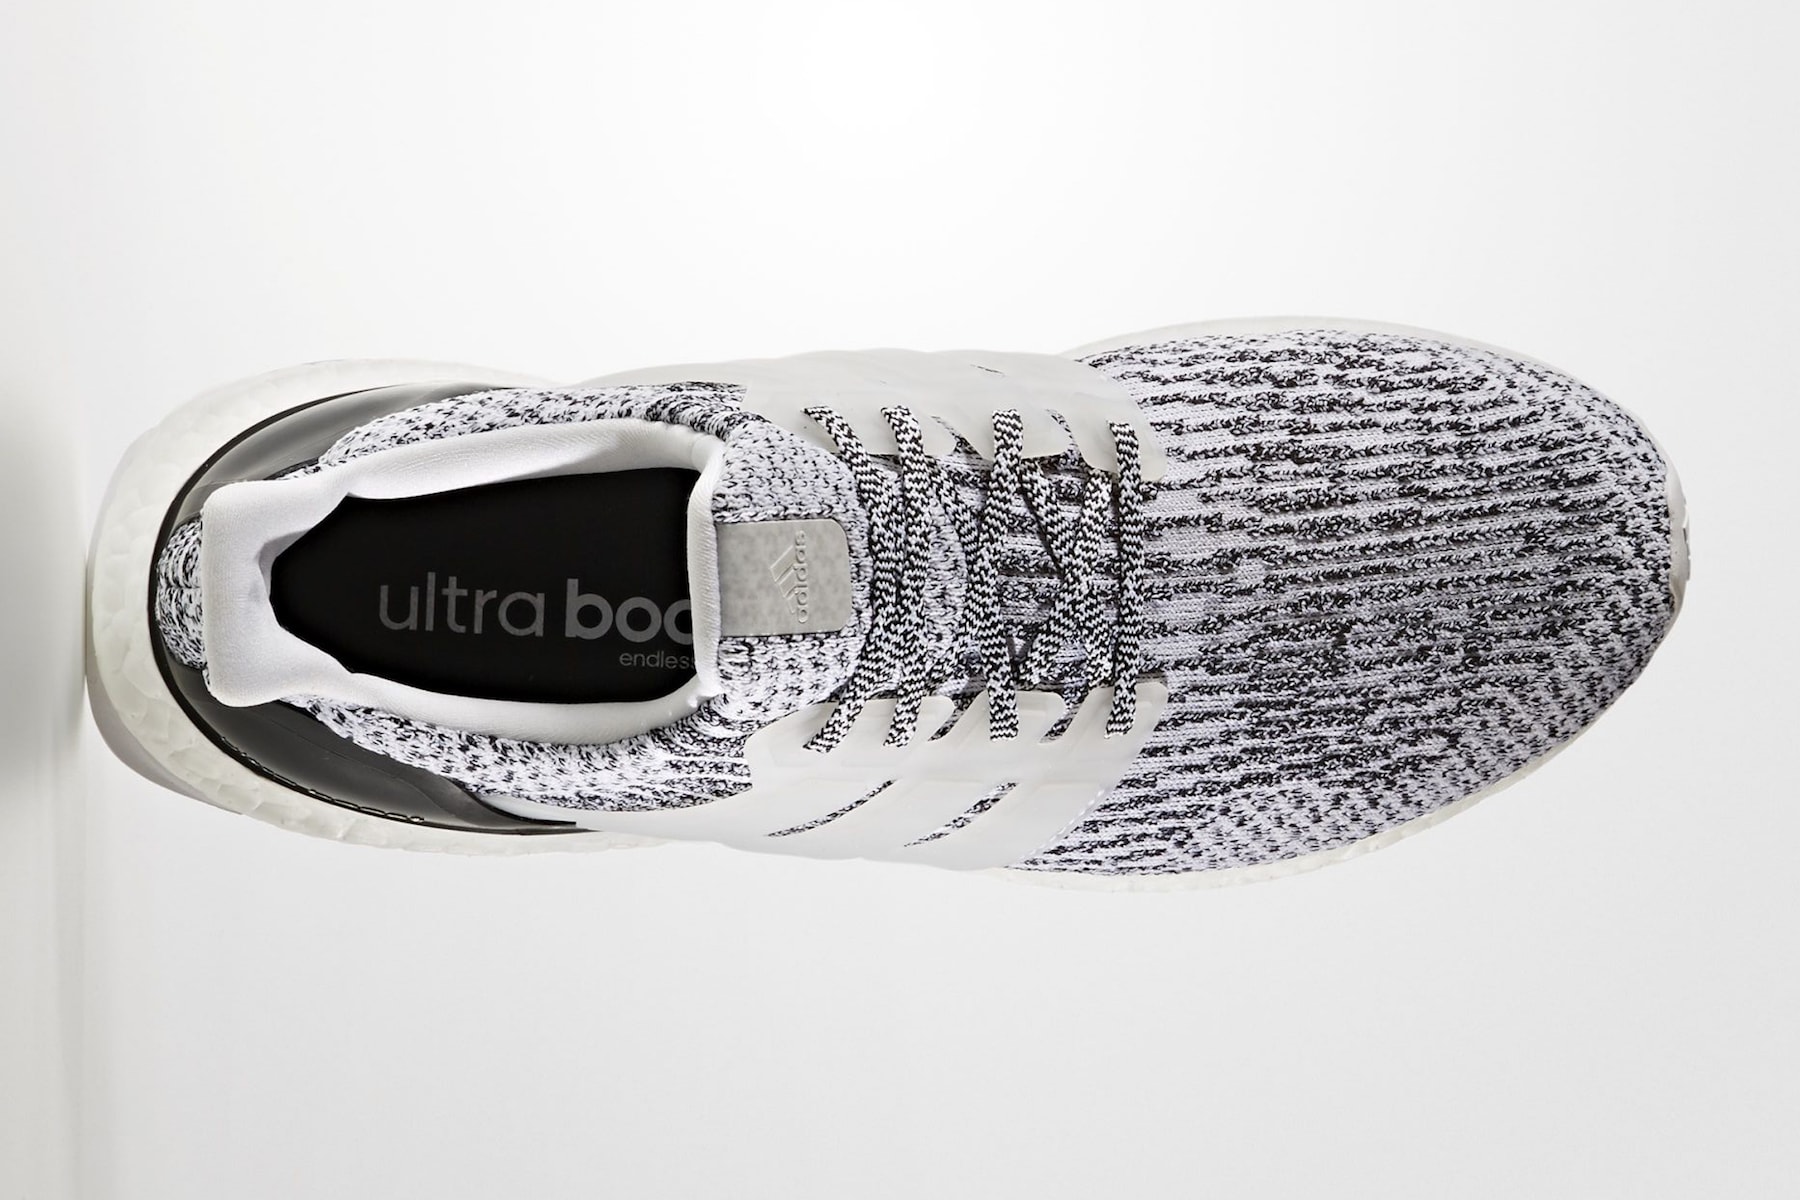 adidas UltraBOOST 3.0 “Oreo” Official Images